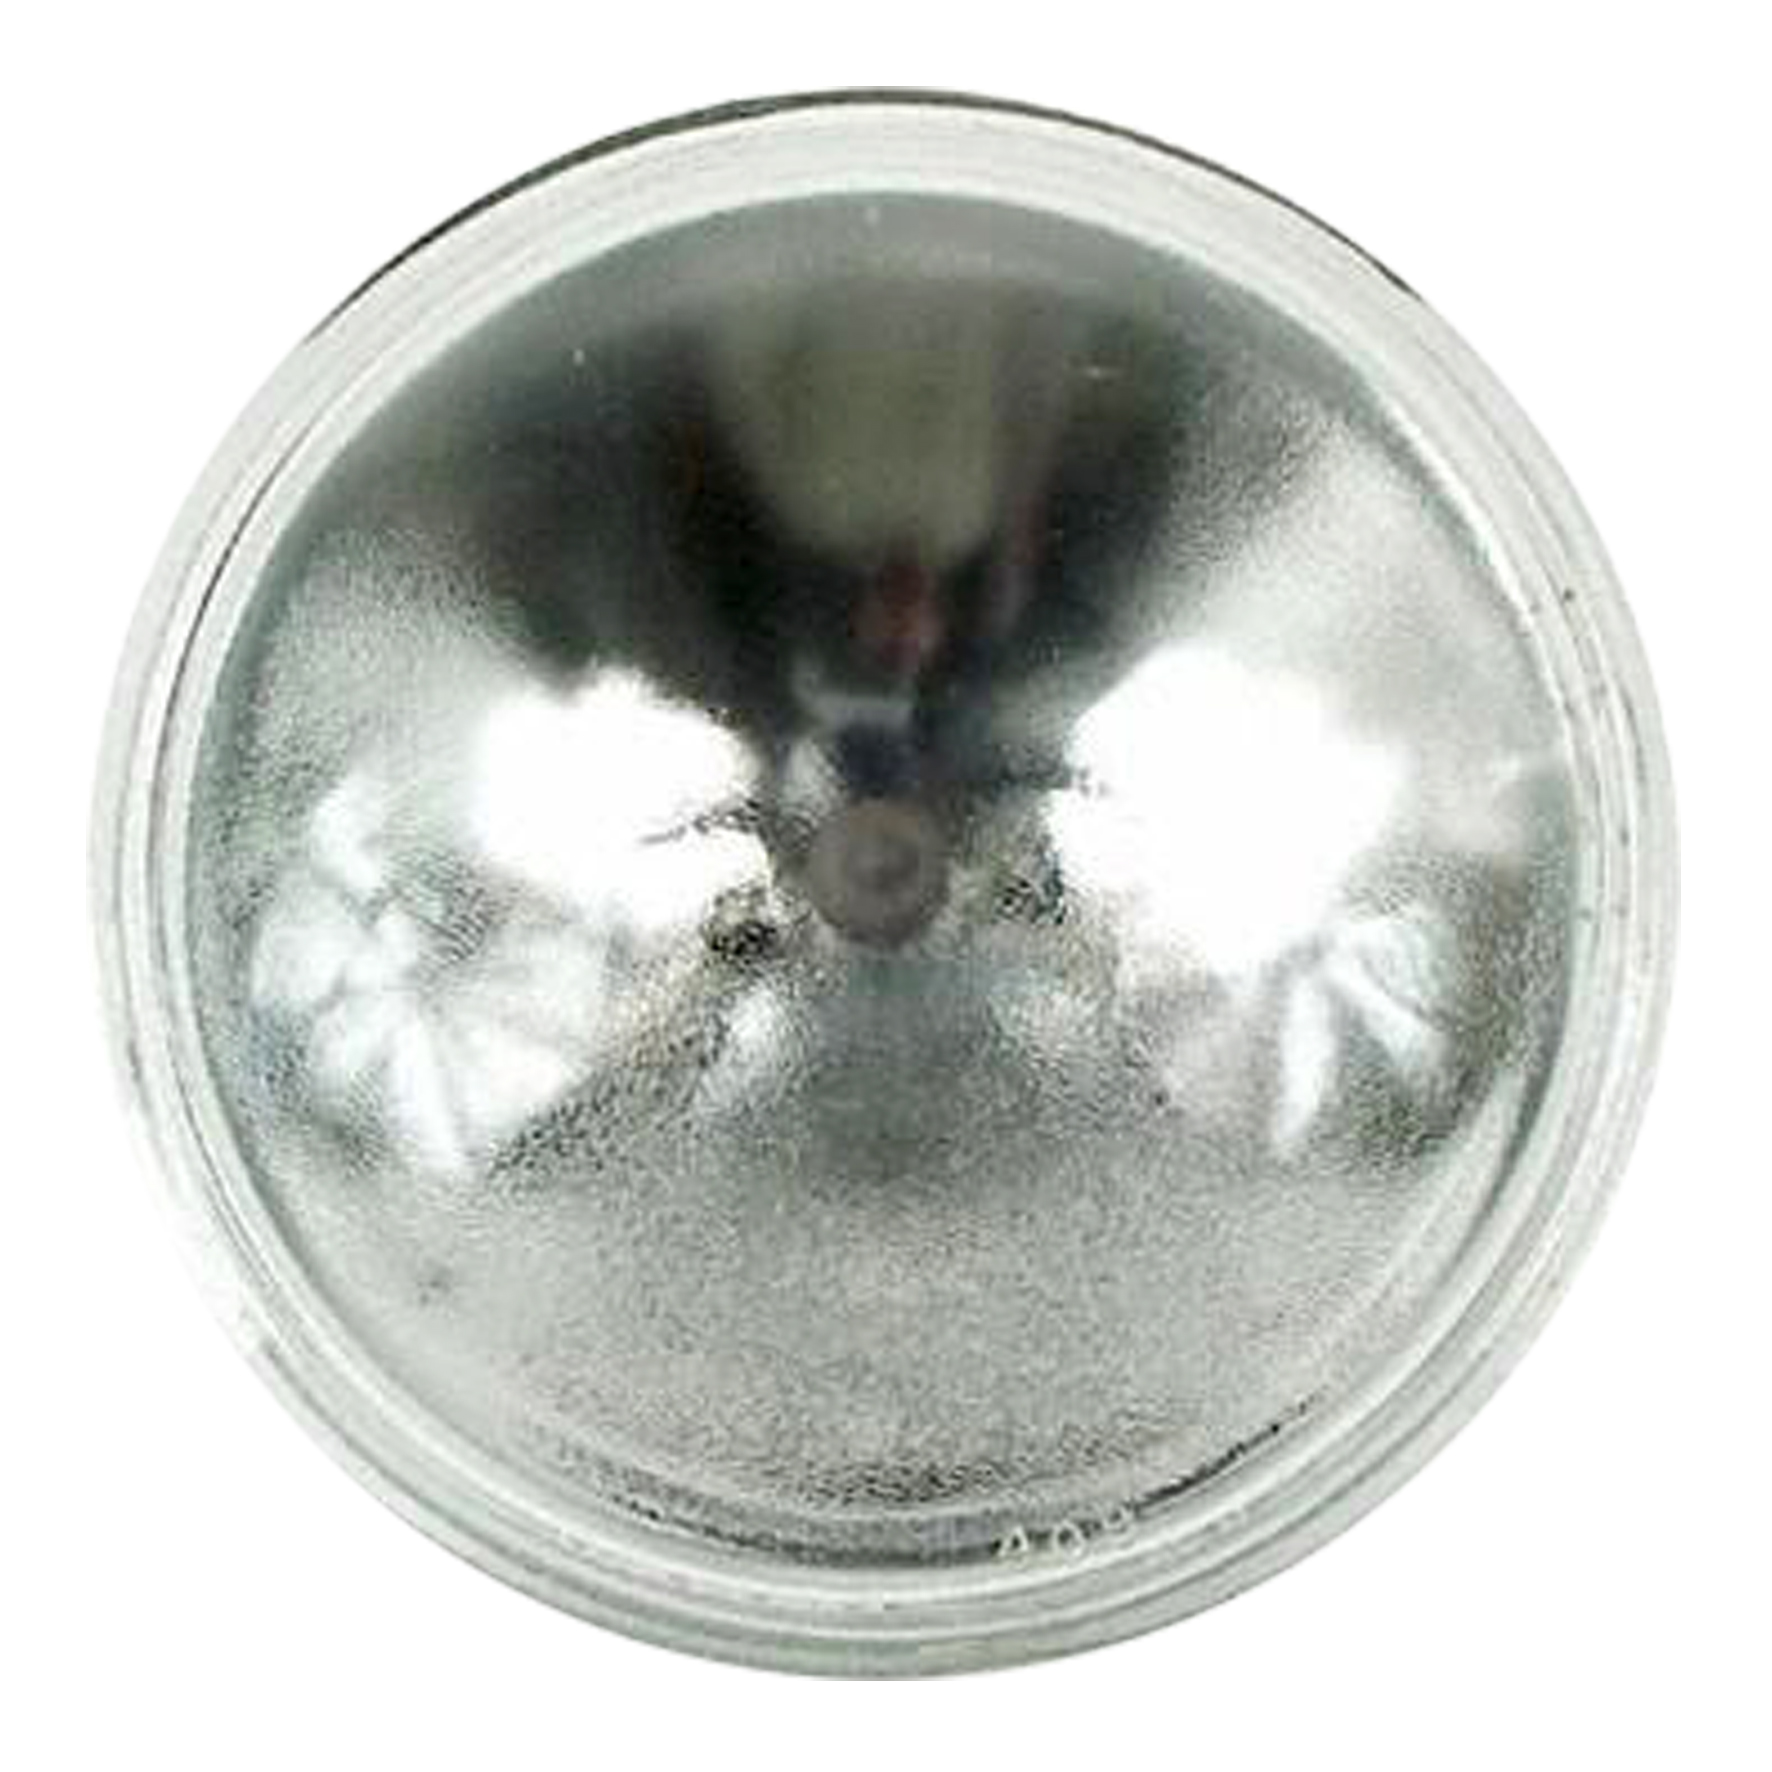 142710 - - Sealed beam - Specialty lamps - Lamps - Products | Bailey